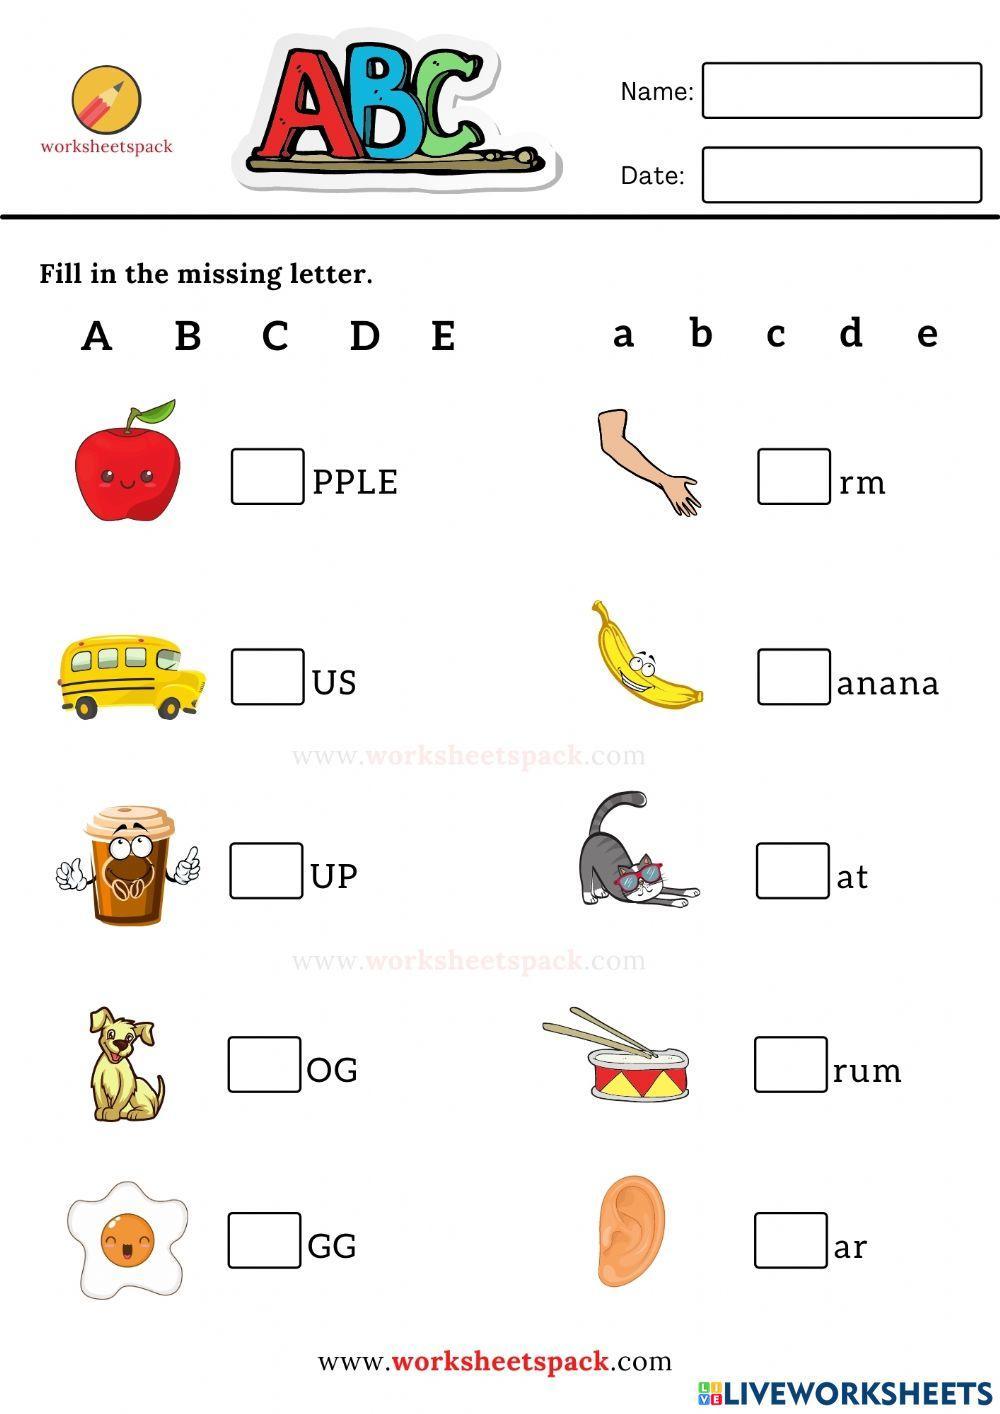 Fill in the missing letter worksheets A to E